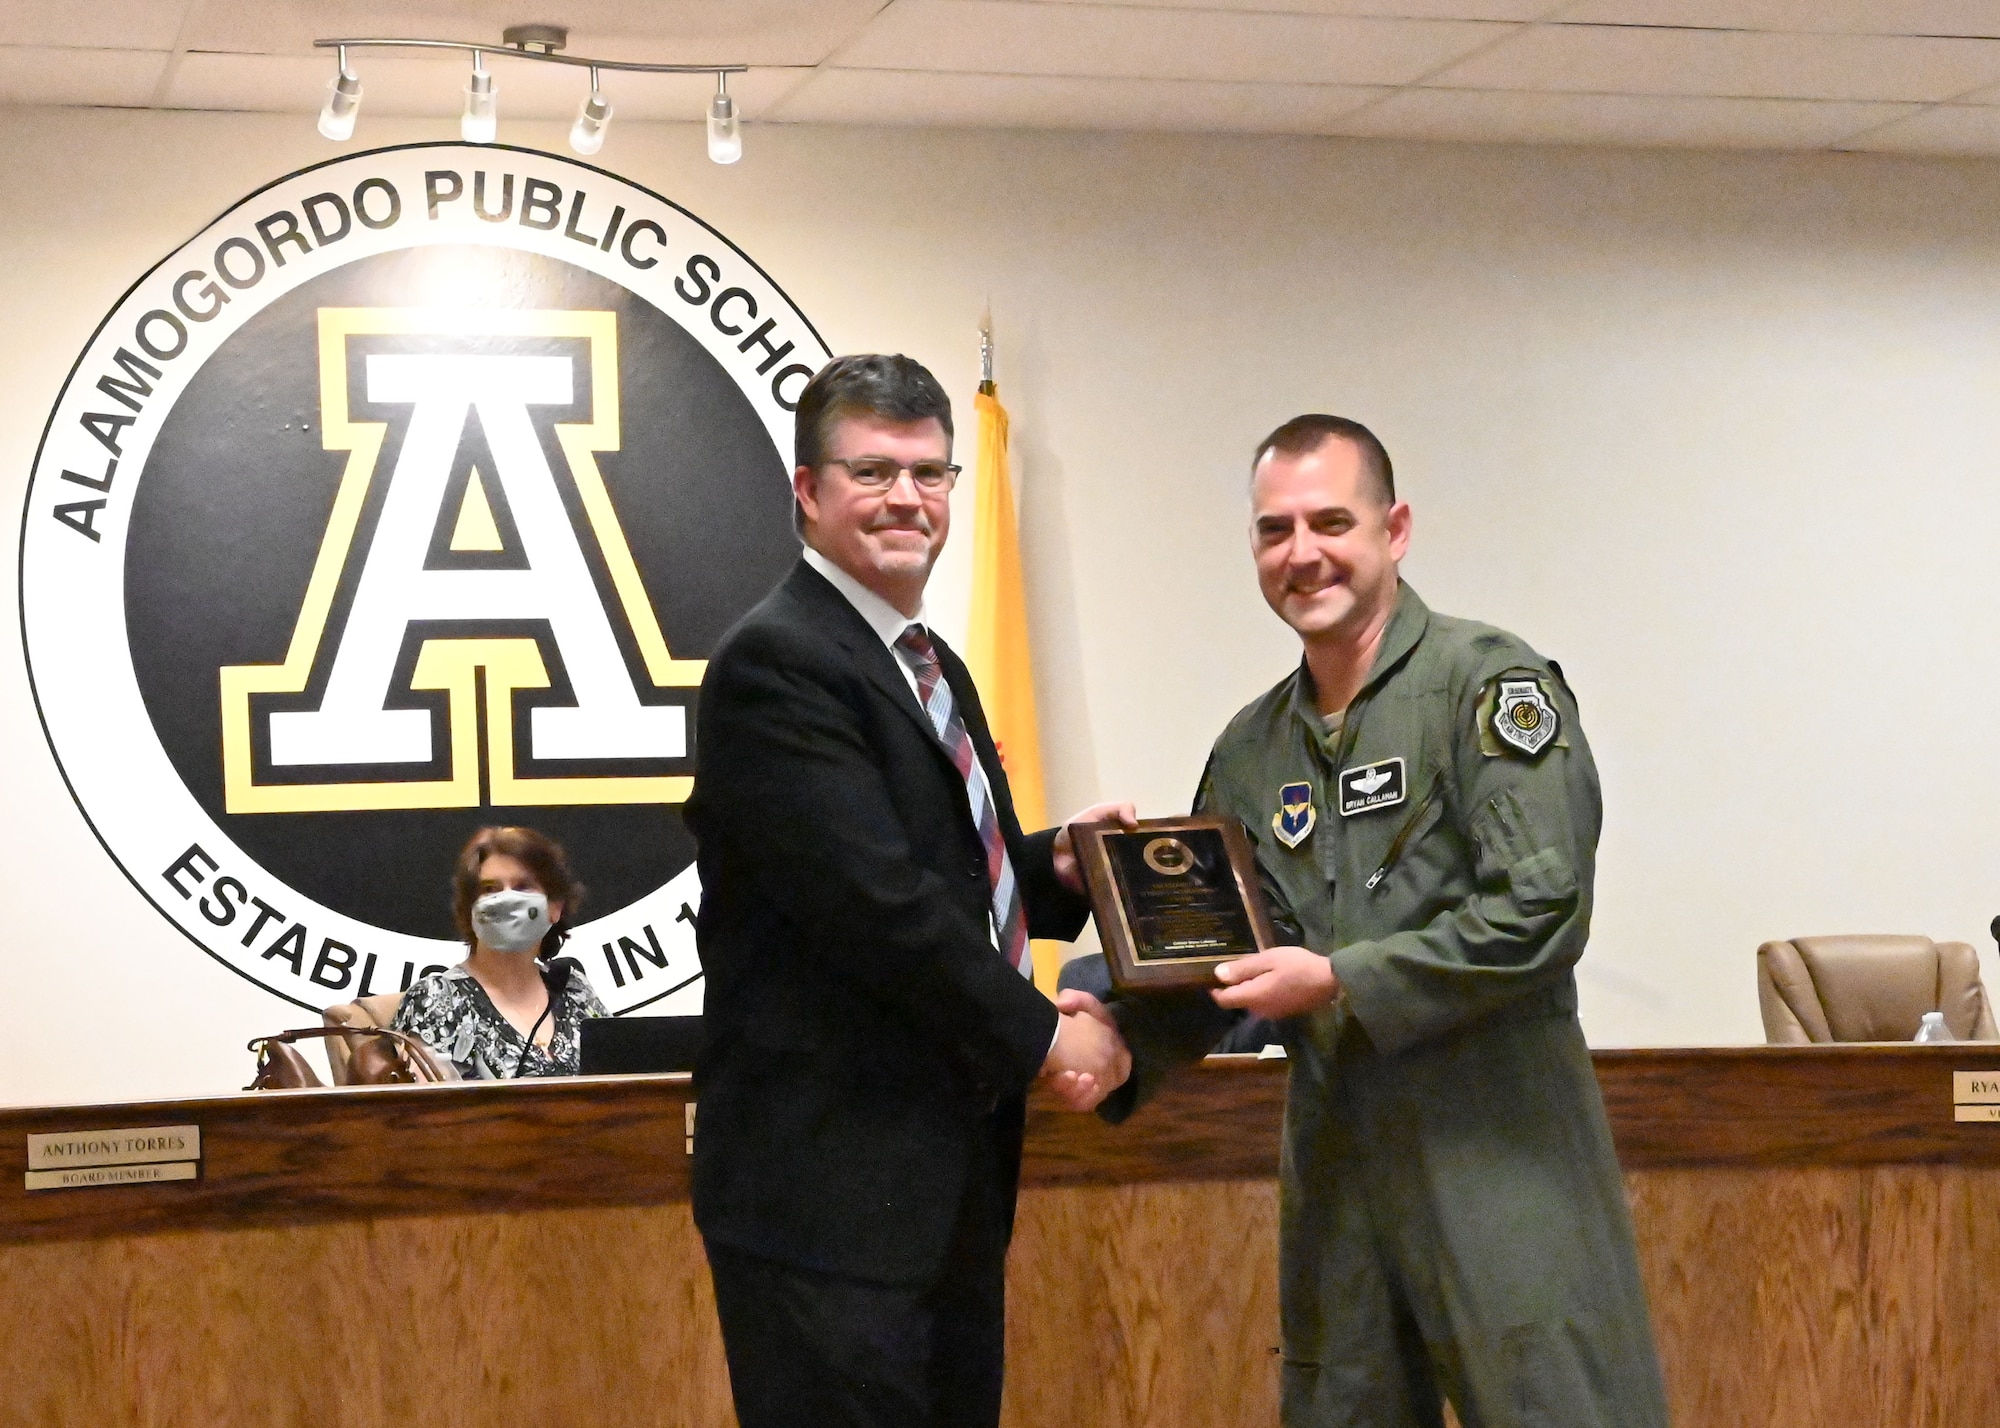 Ryan Sherwood, left, Alamogordo Public School Board vice president, presents Col. Bryan Callahan, 49th Wing vice commander, with the New Mexico School Board Association Student Achievement Award, May 19, 2021, in Alamogordo, New Mexico. Throughout his tenure, Callahan worked alongside school board members to bring improvements to both Holloman Air Force Base and the Alamogordo community. (U.S. Air Force photo by Shelley Bailey)